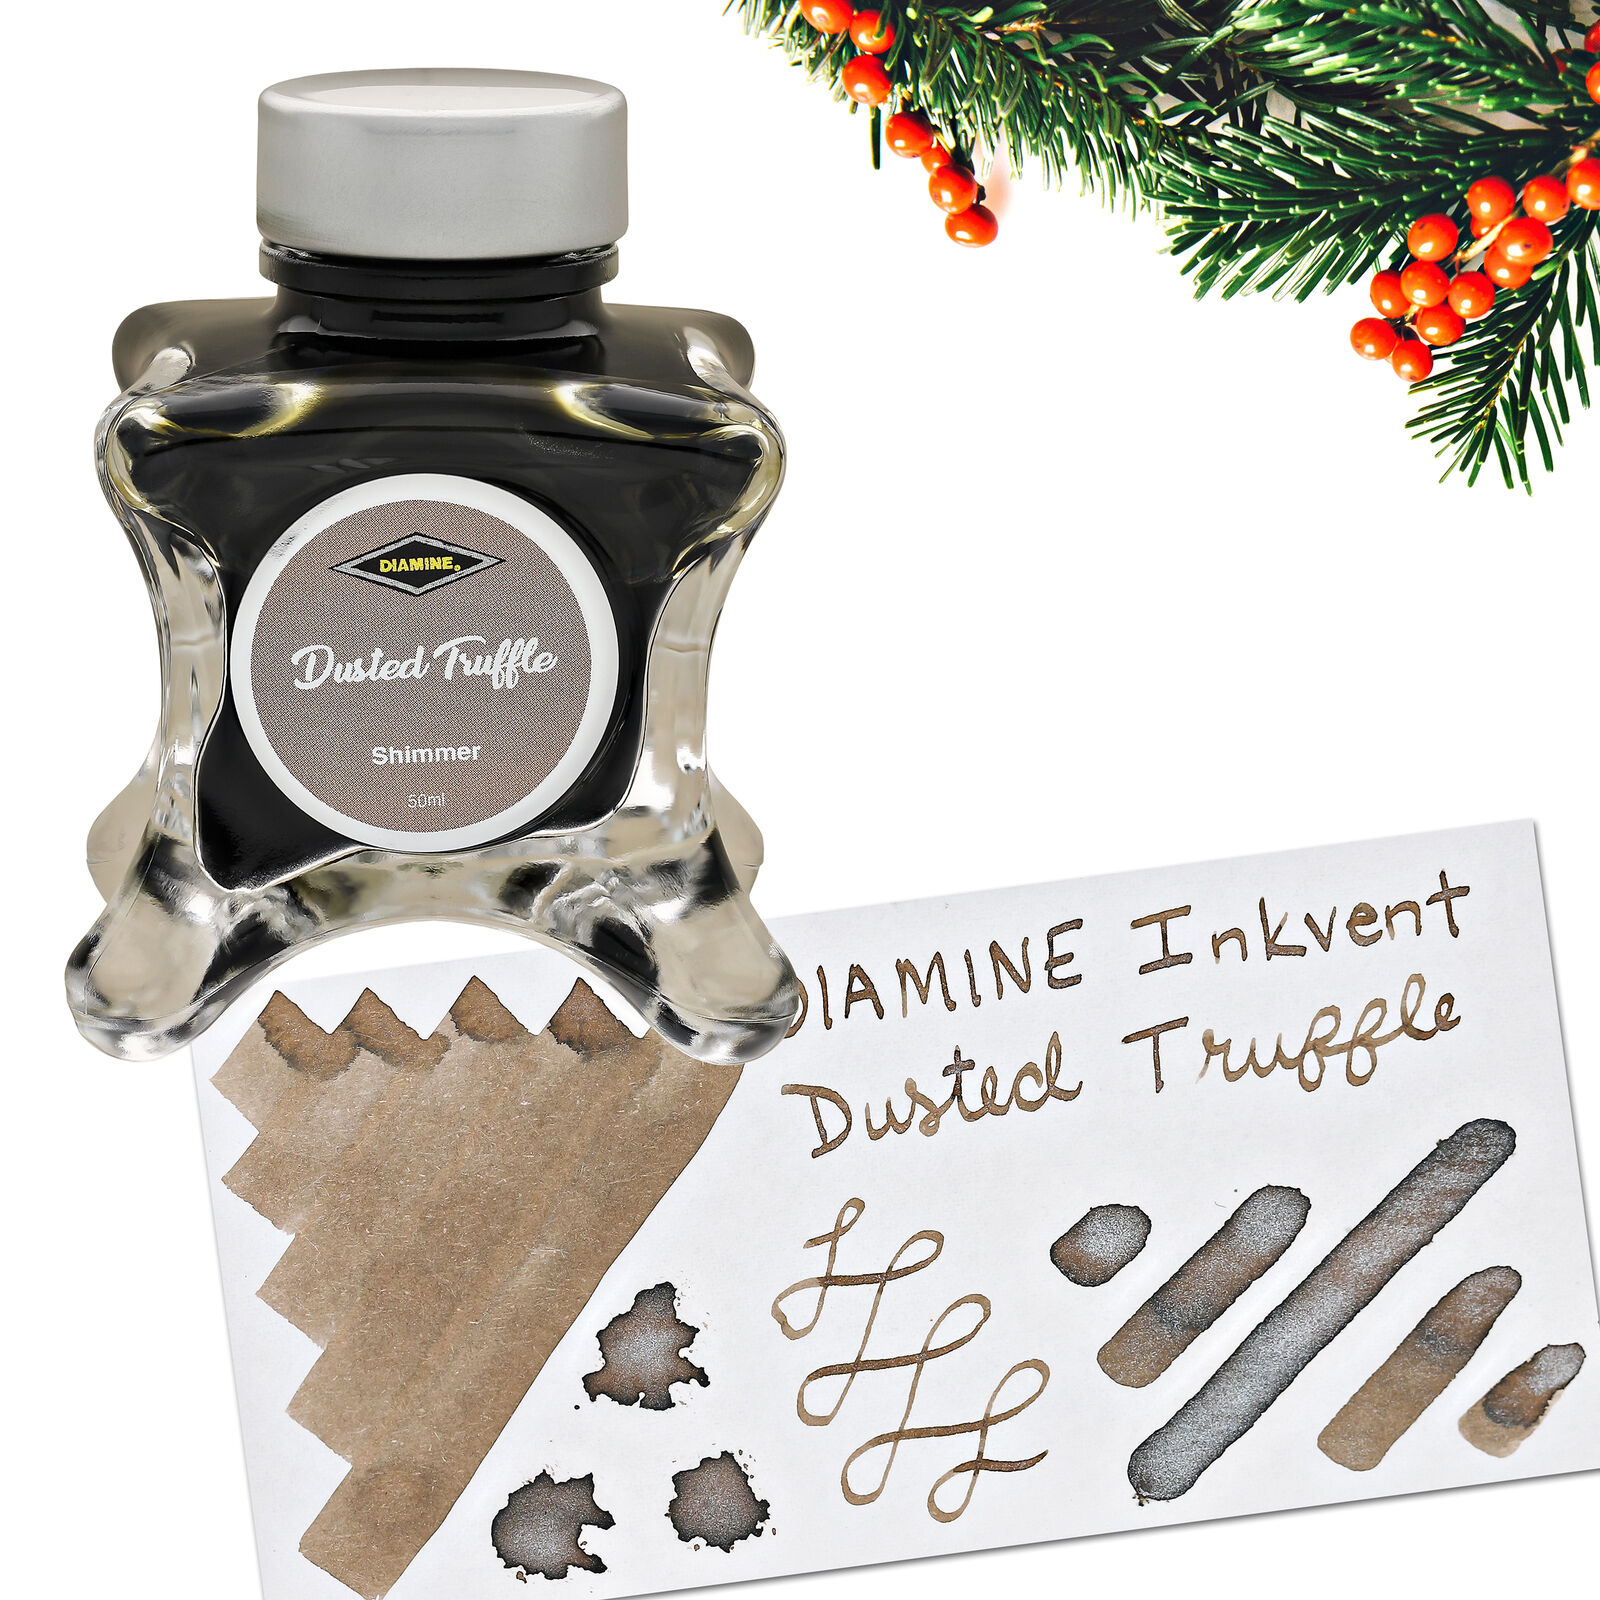 Diamine Inkvent Green Edition Shimmer Bottled Ink in Dusted Truffle - 50 mL NEW